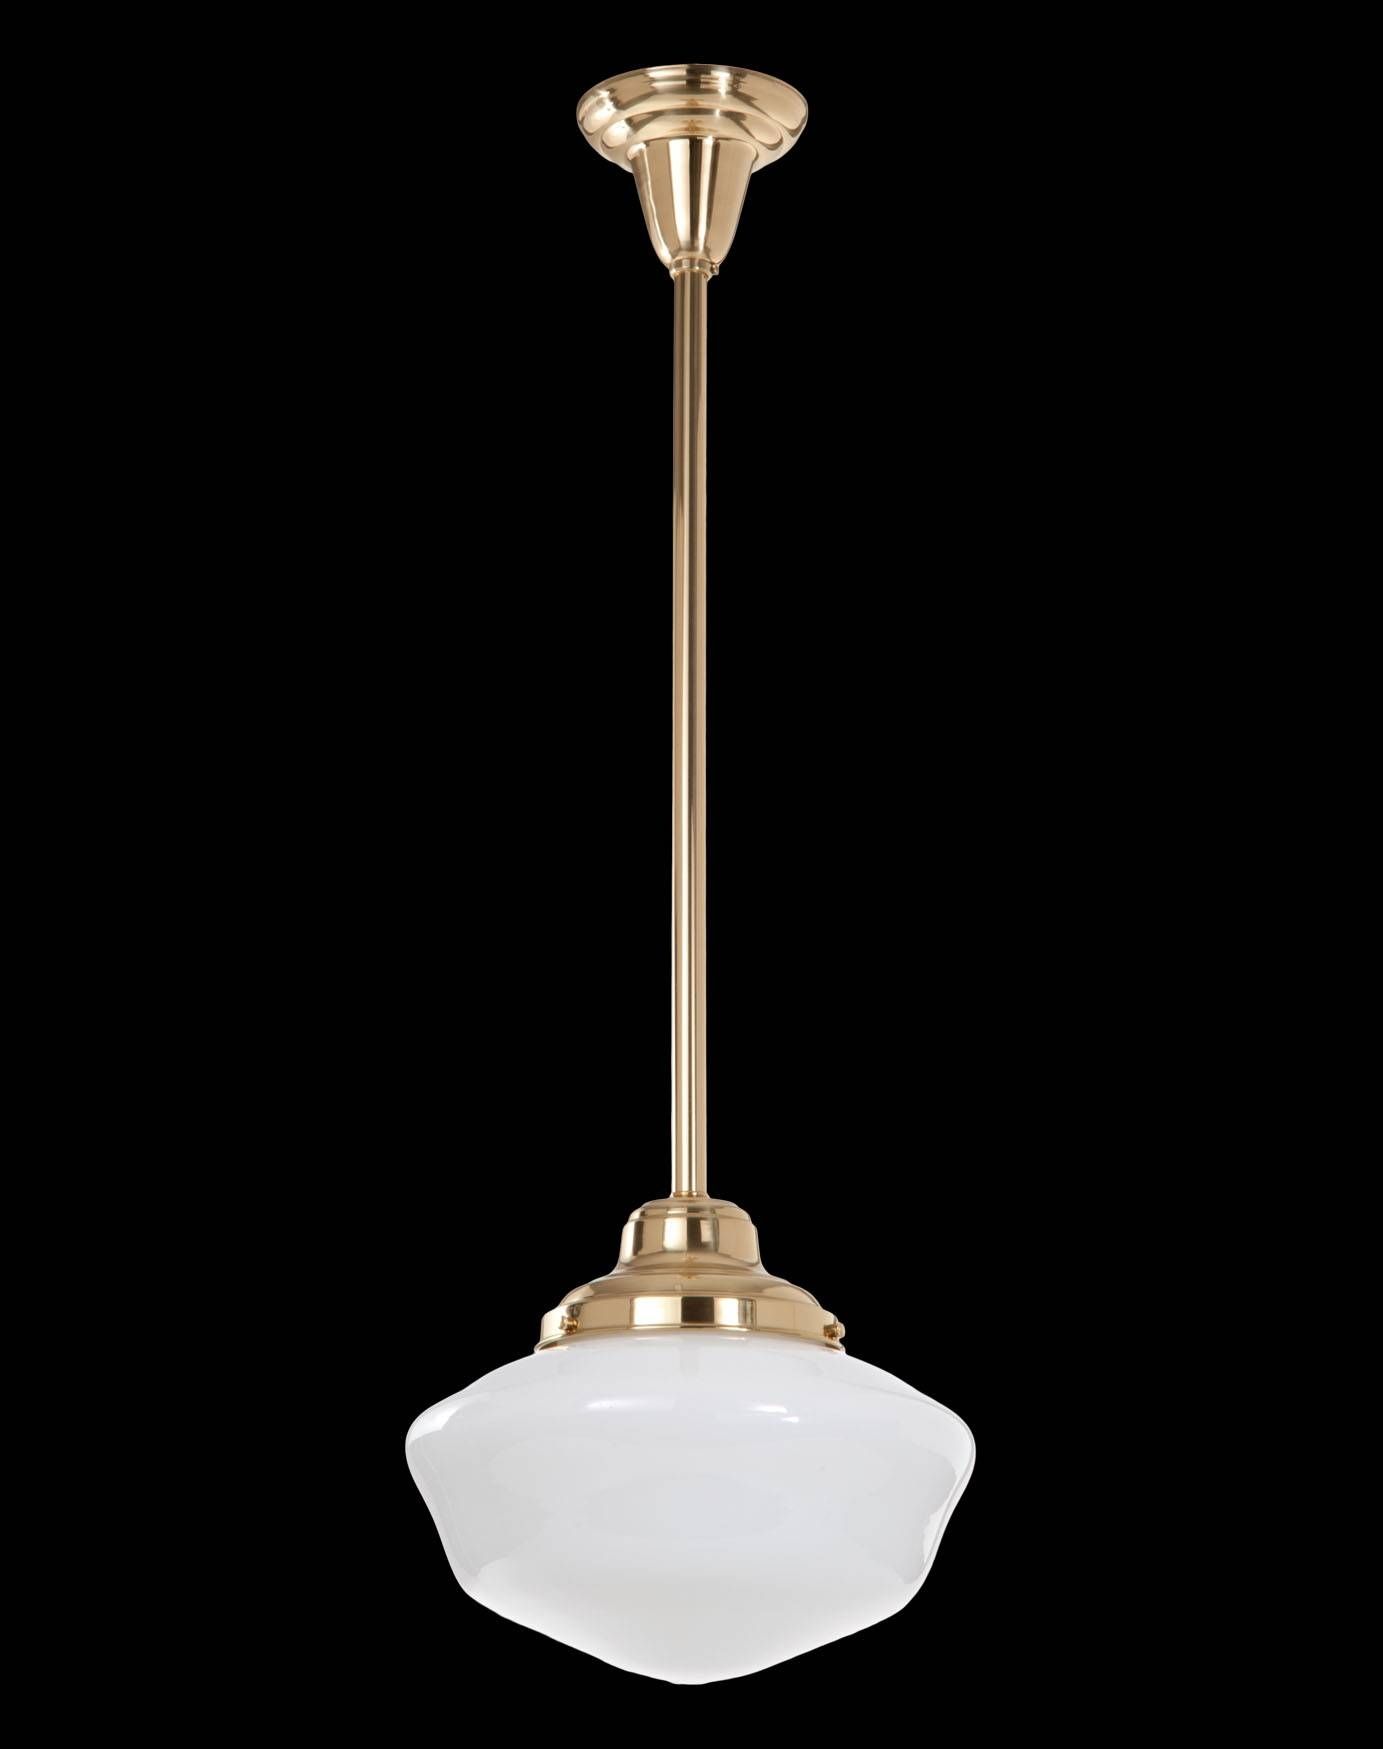 Inspirational Victorian Pendant Lighting 61 For Your Ceiling Fans Pertaining To Victorian Pendant Lights (View 6 of 15)